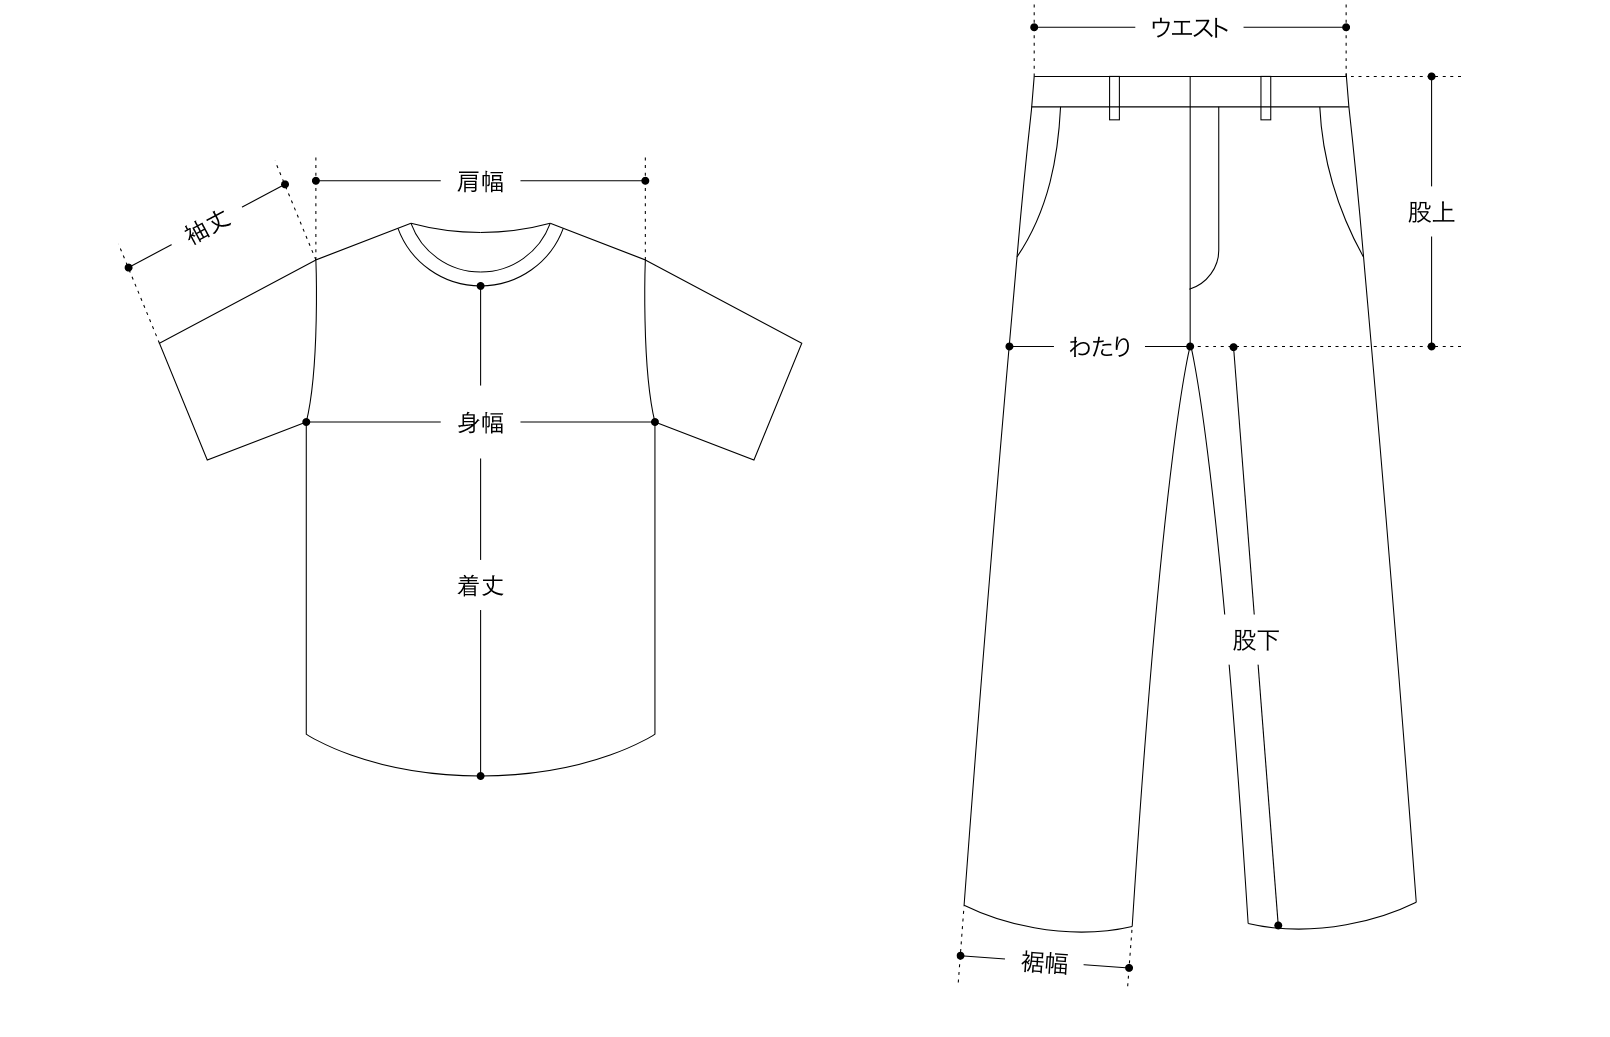 Size guide image